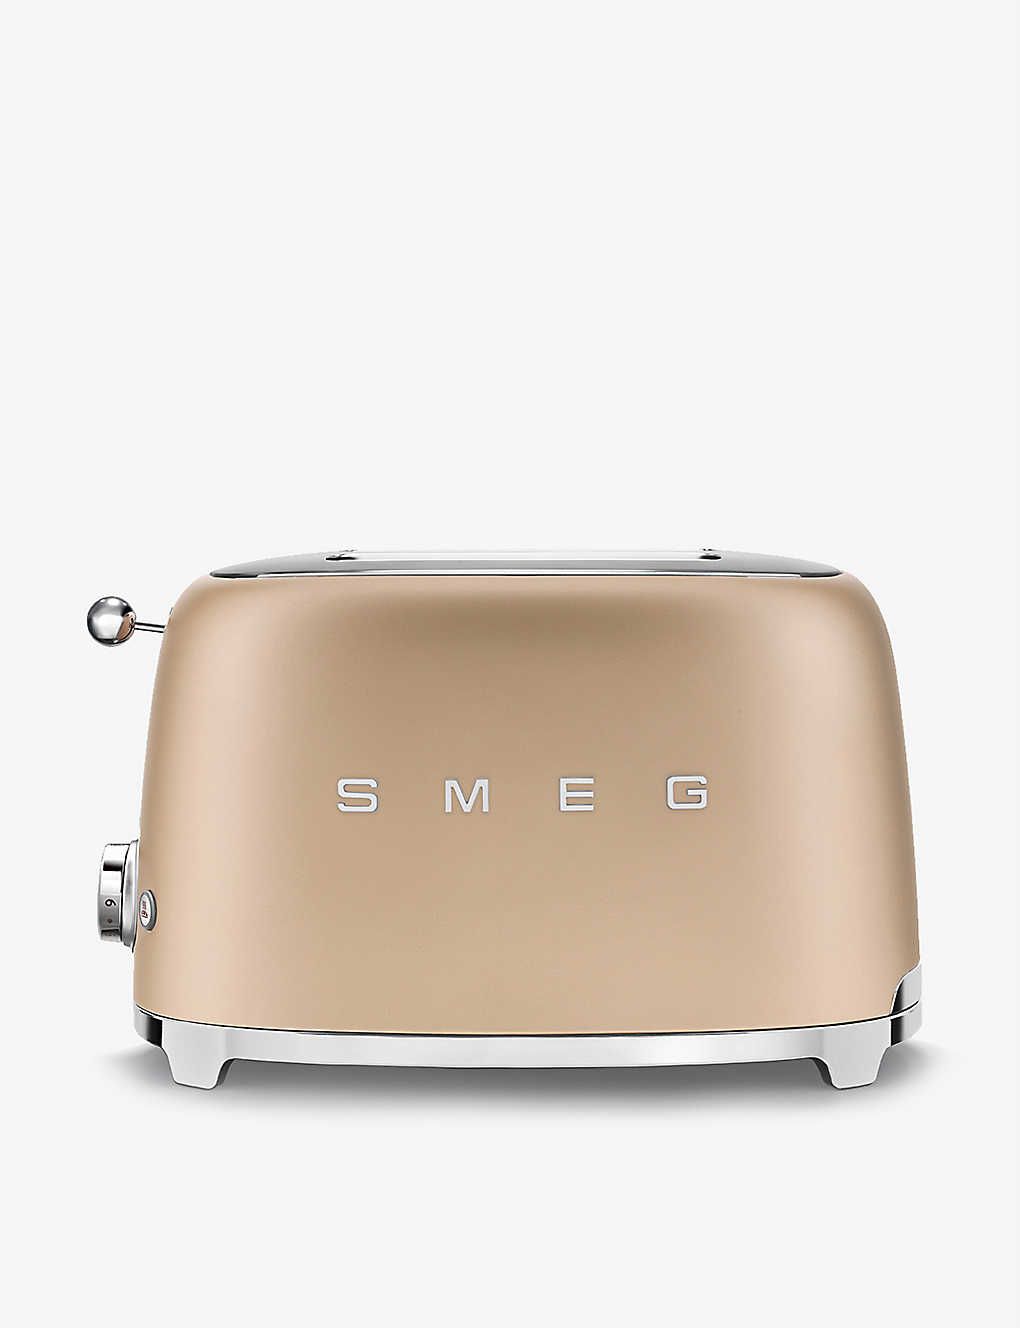 Matte special-edition two-slot stainless-steel toaster | Selfridges